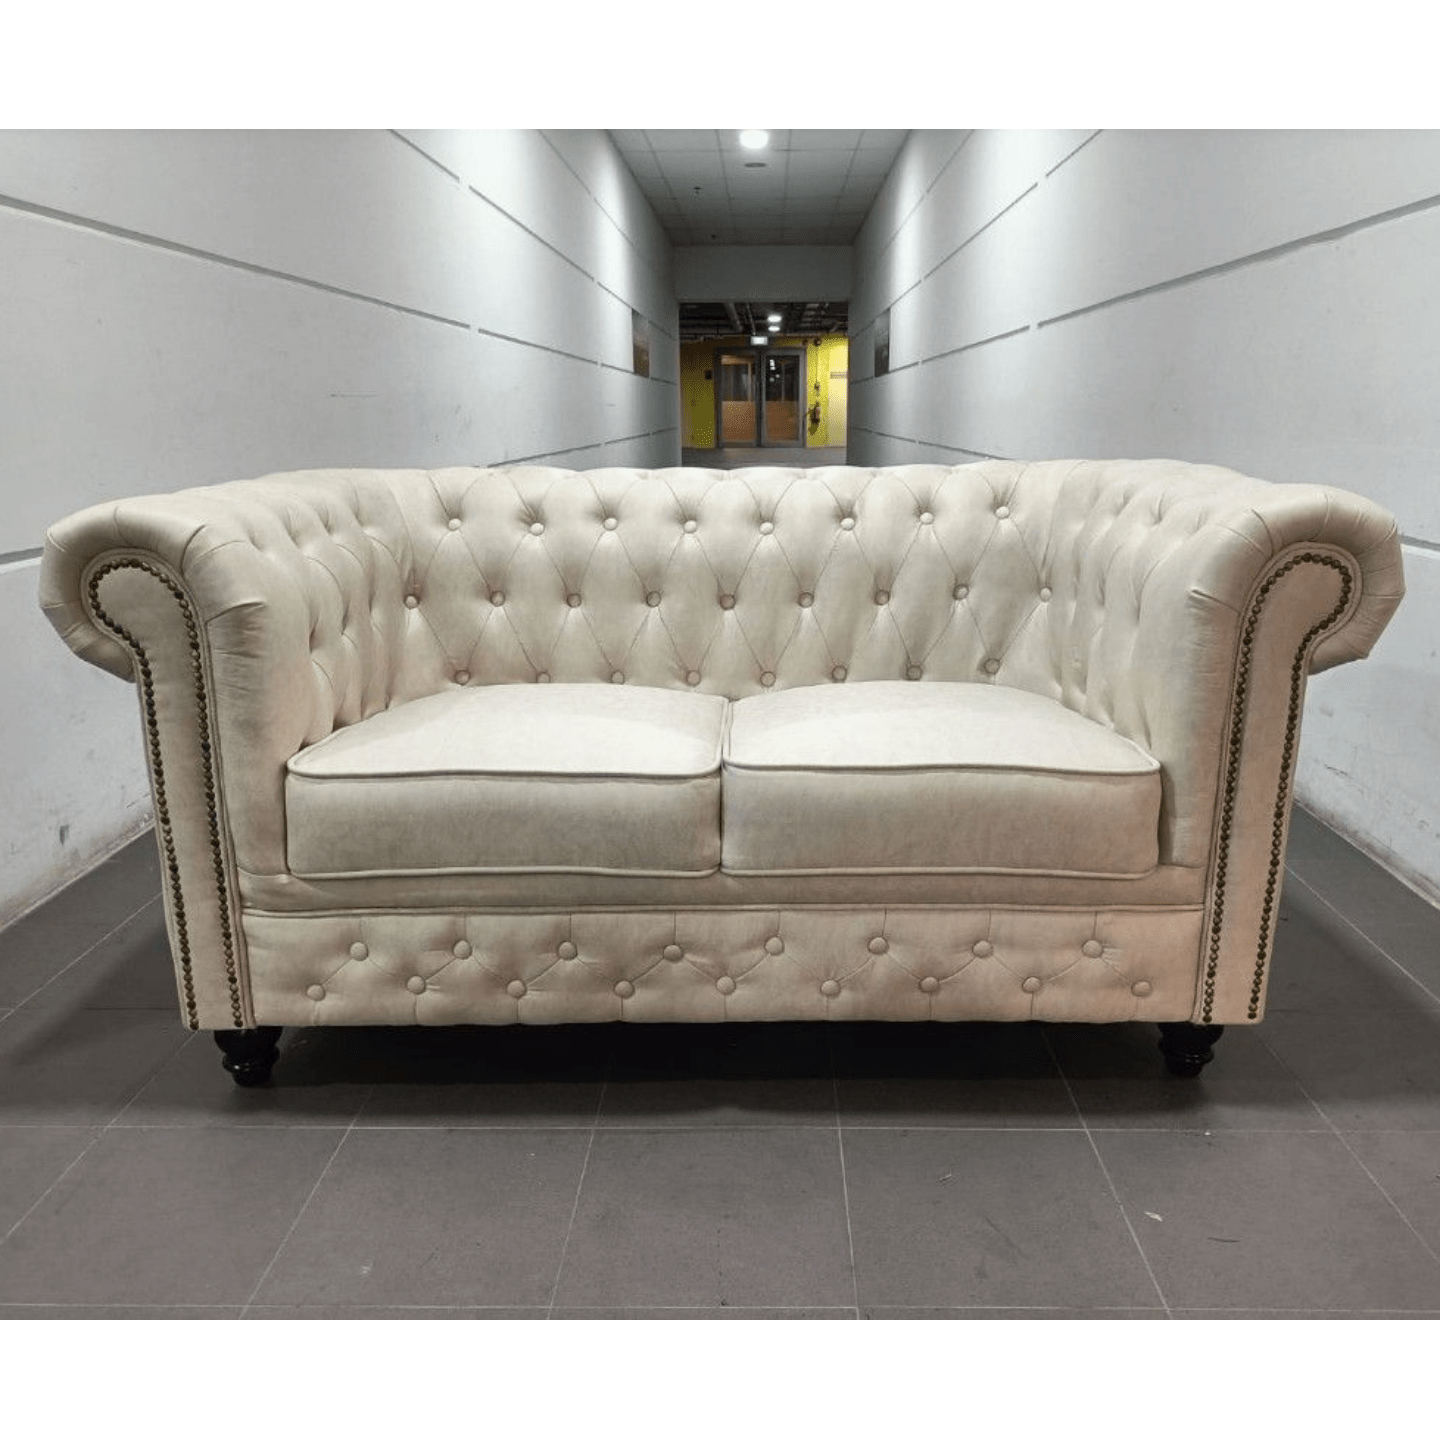 CAT FRIENDLY SALVADORE X 2 Seater Chesterfield Sofa in MACAROON CREAM WHITE TECH LEATHAIRE